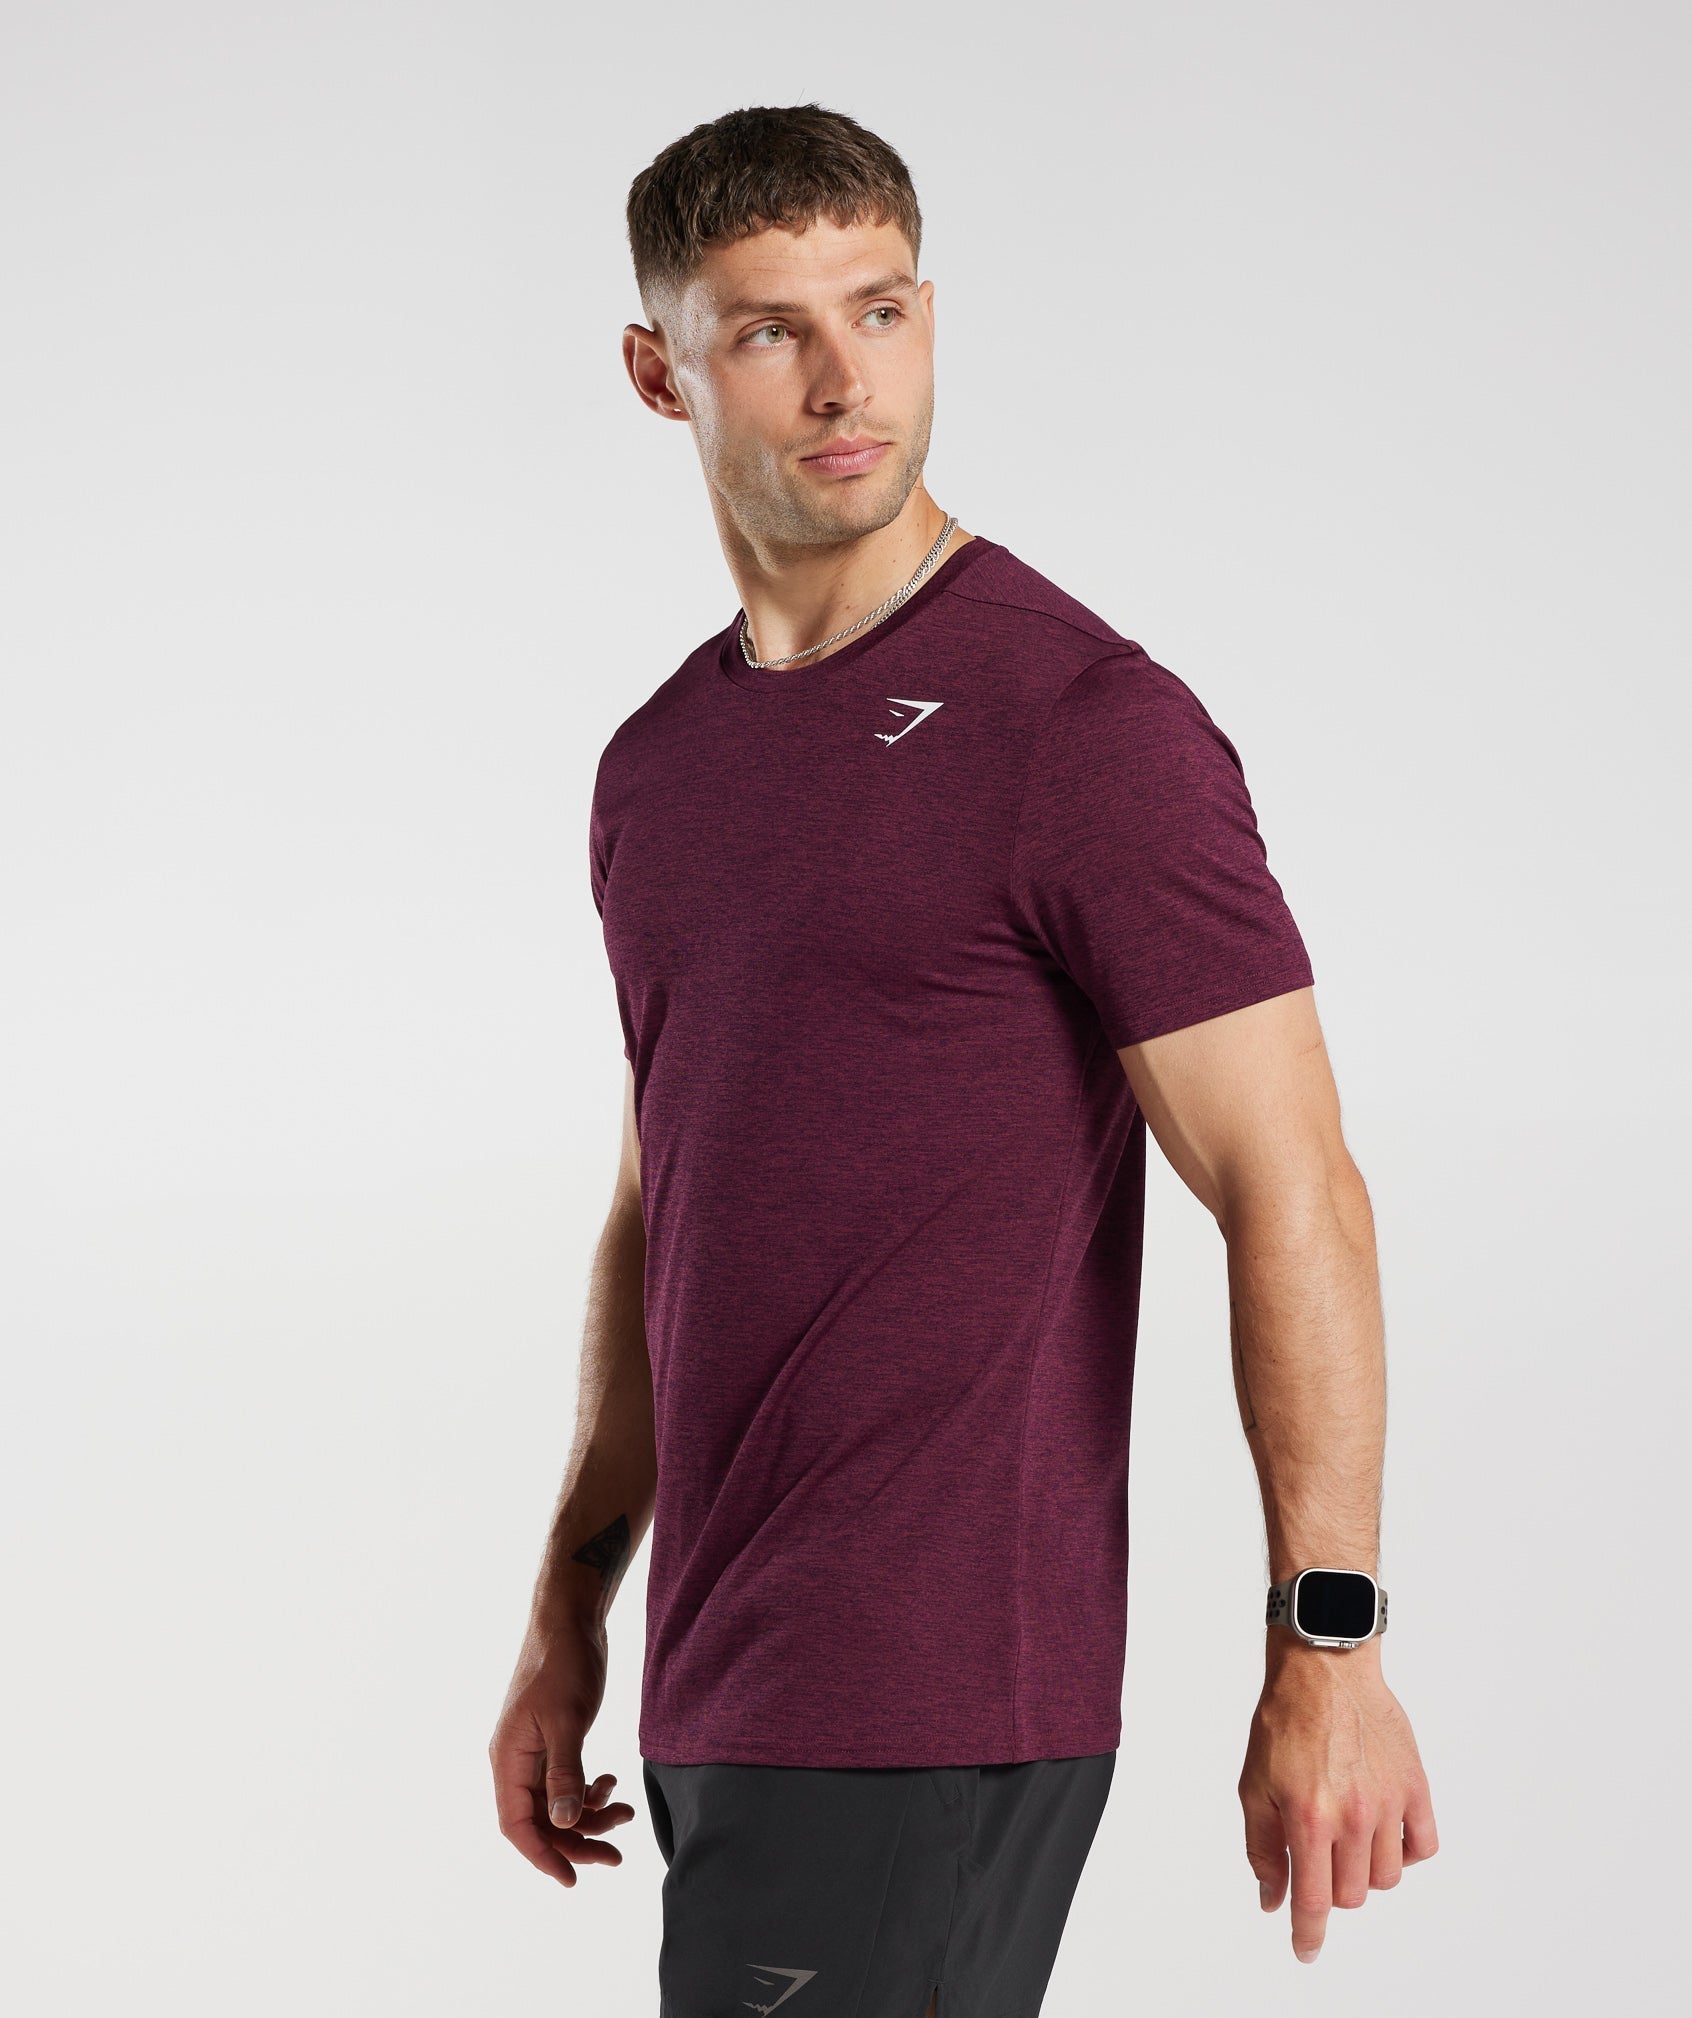 Arrival Marl T-Shirt in Plum Pink/Plum Brown Marl - view 3